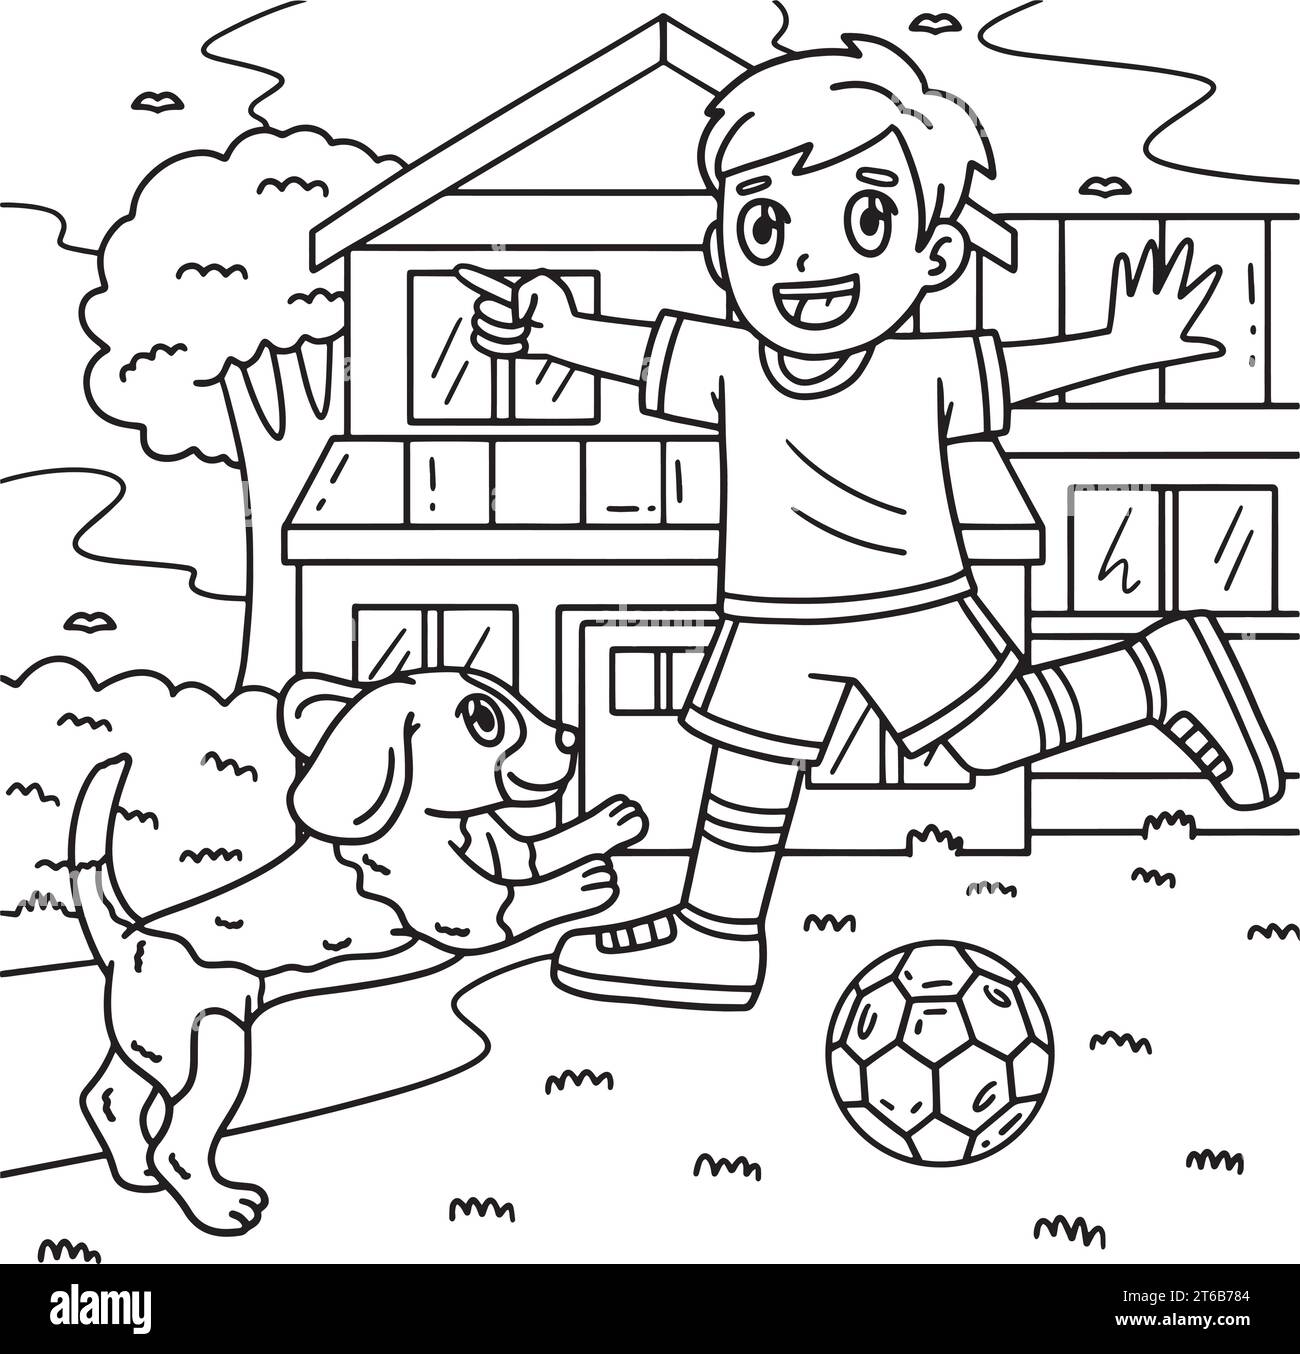 Boy and Dog Playing Soccer Coloring Page for Kids Stock Vector